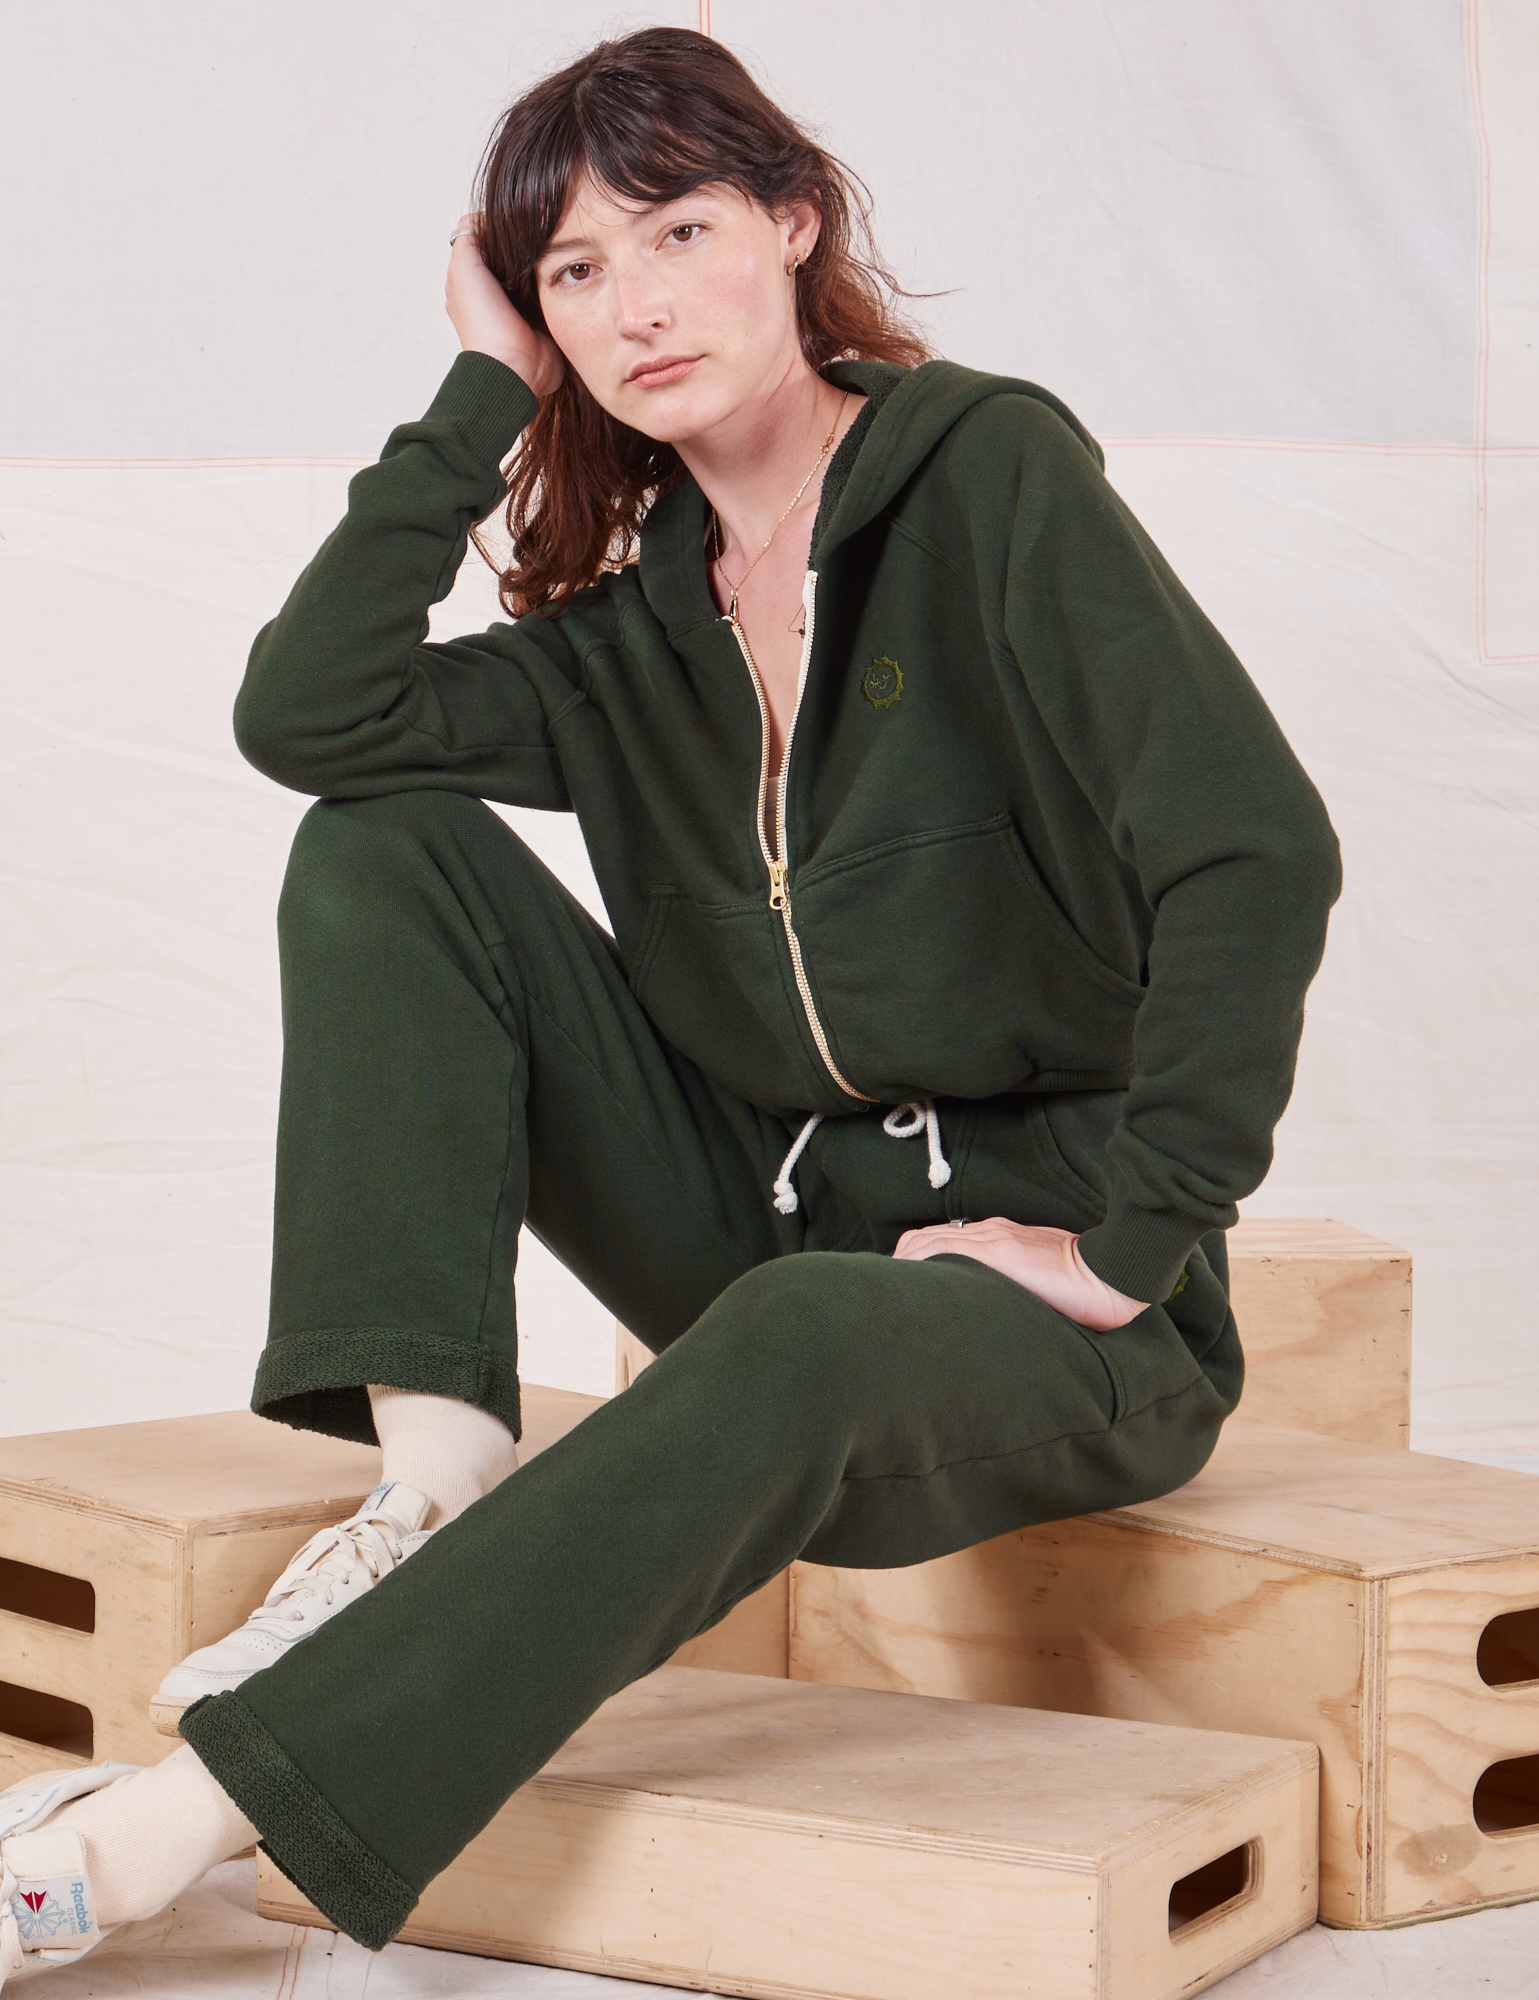 Alex is wearing Cropped Zip Hoodie in Swamp Green and matching Rolled Cuff Sweat Pants